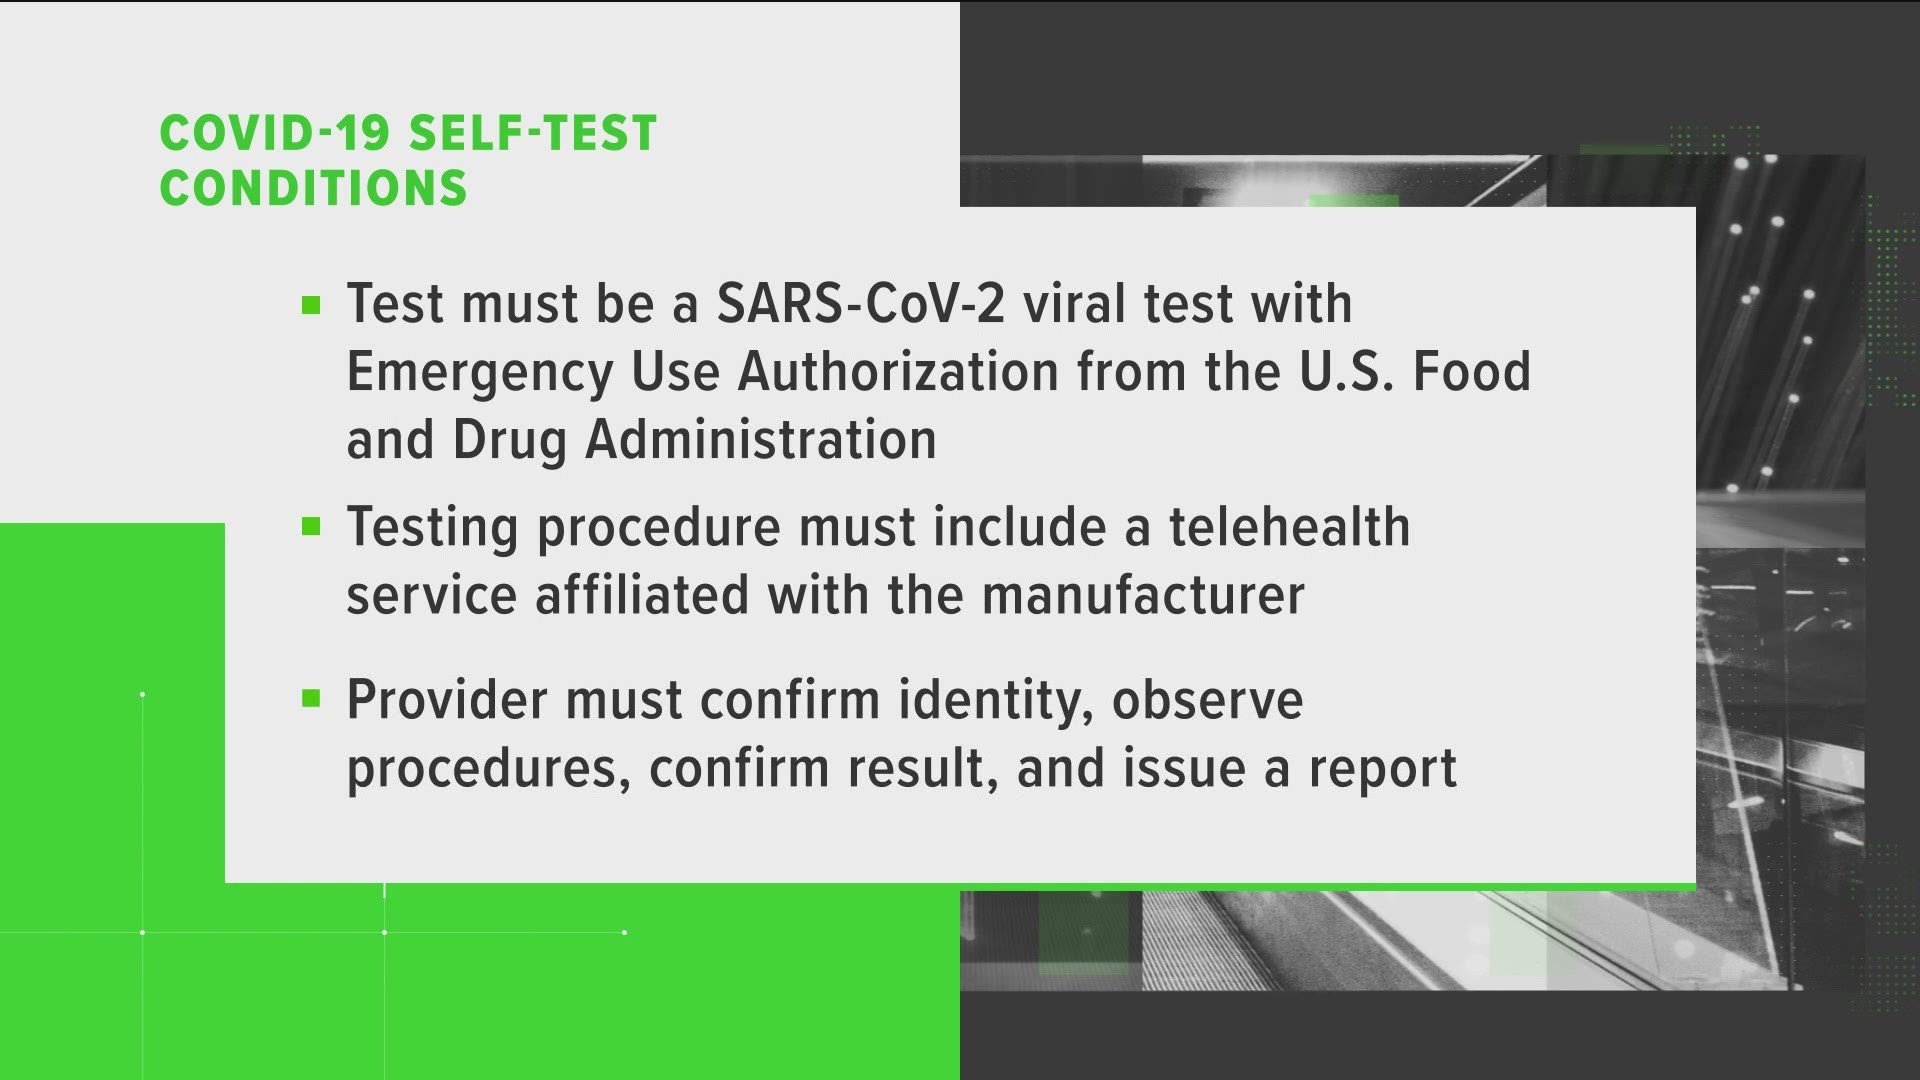 KVUE's Erica Proffers verifies what COVID-19 testing requirements need to be met before traveling from the U.S. into another country.